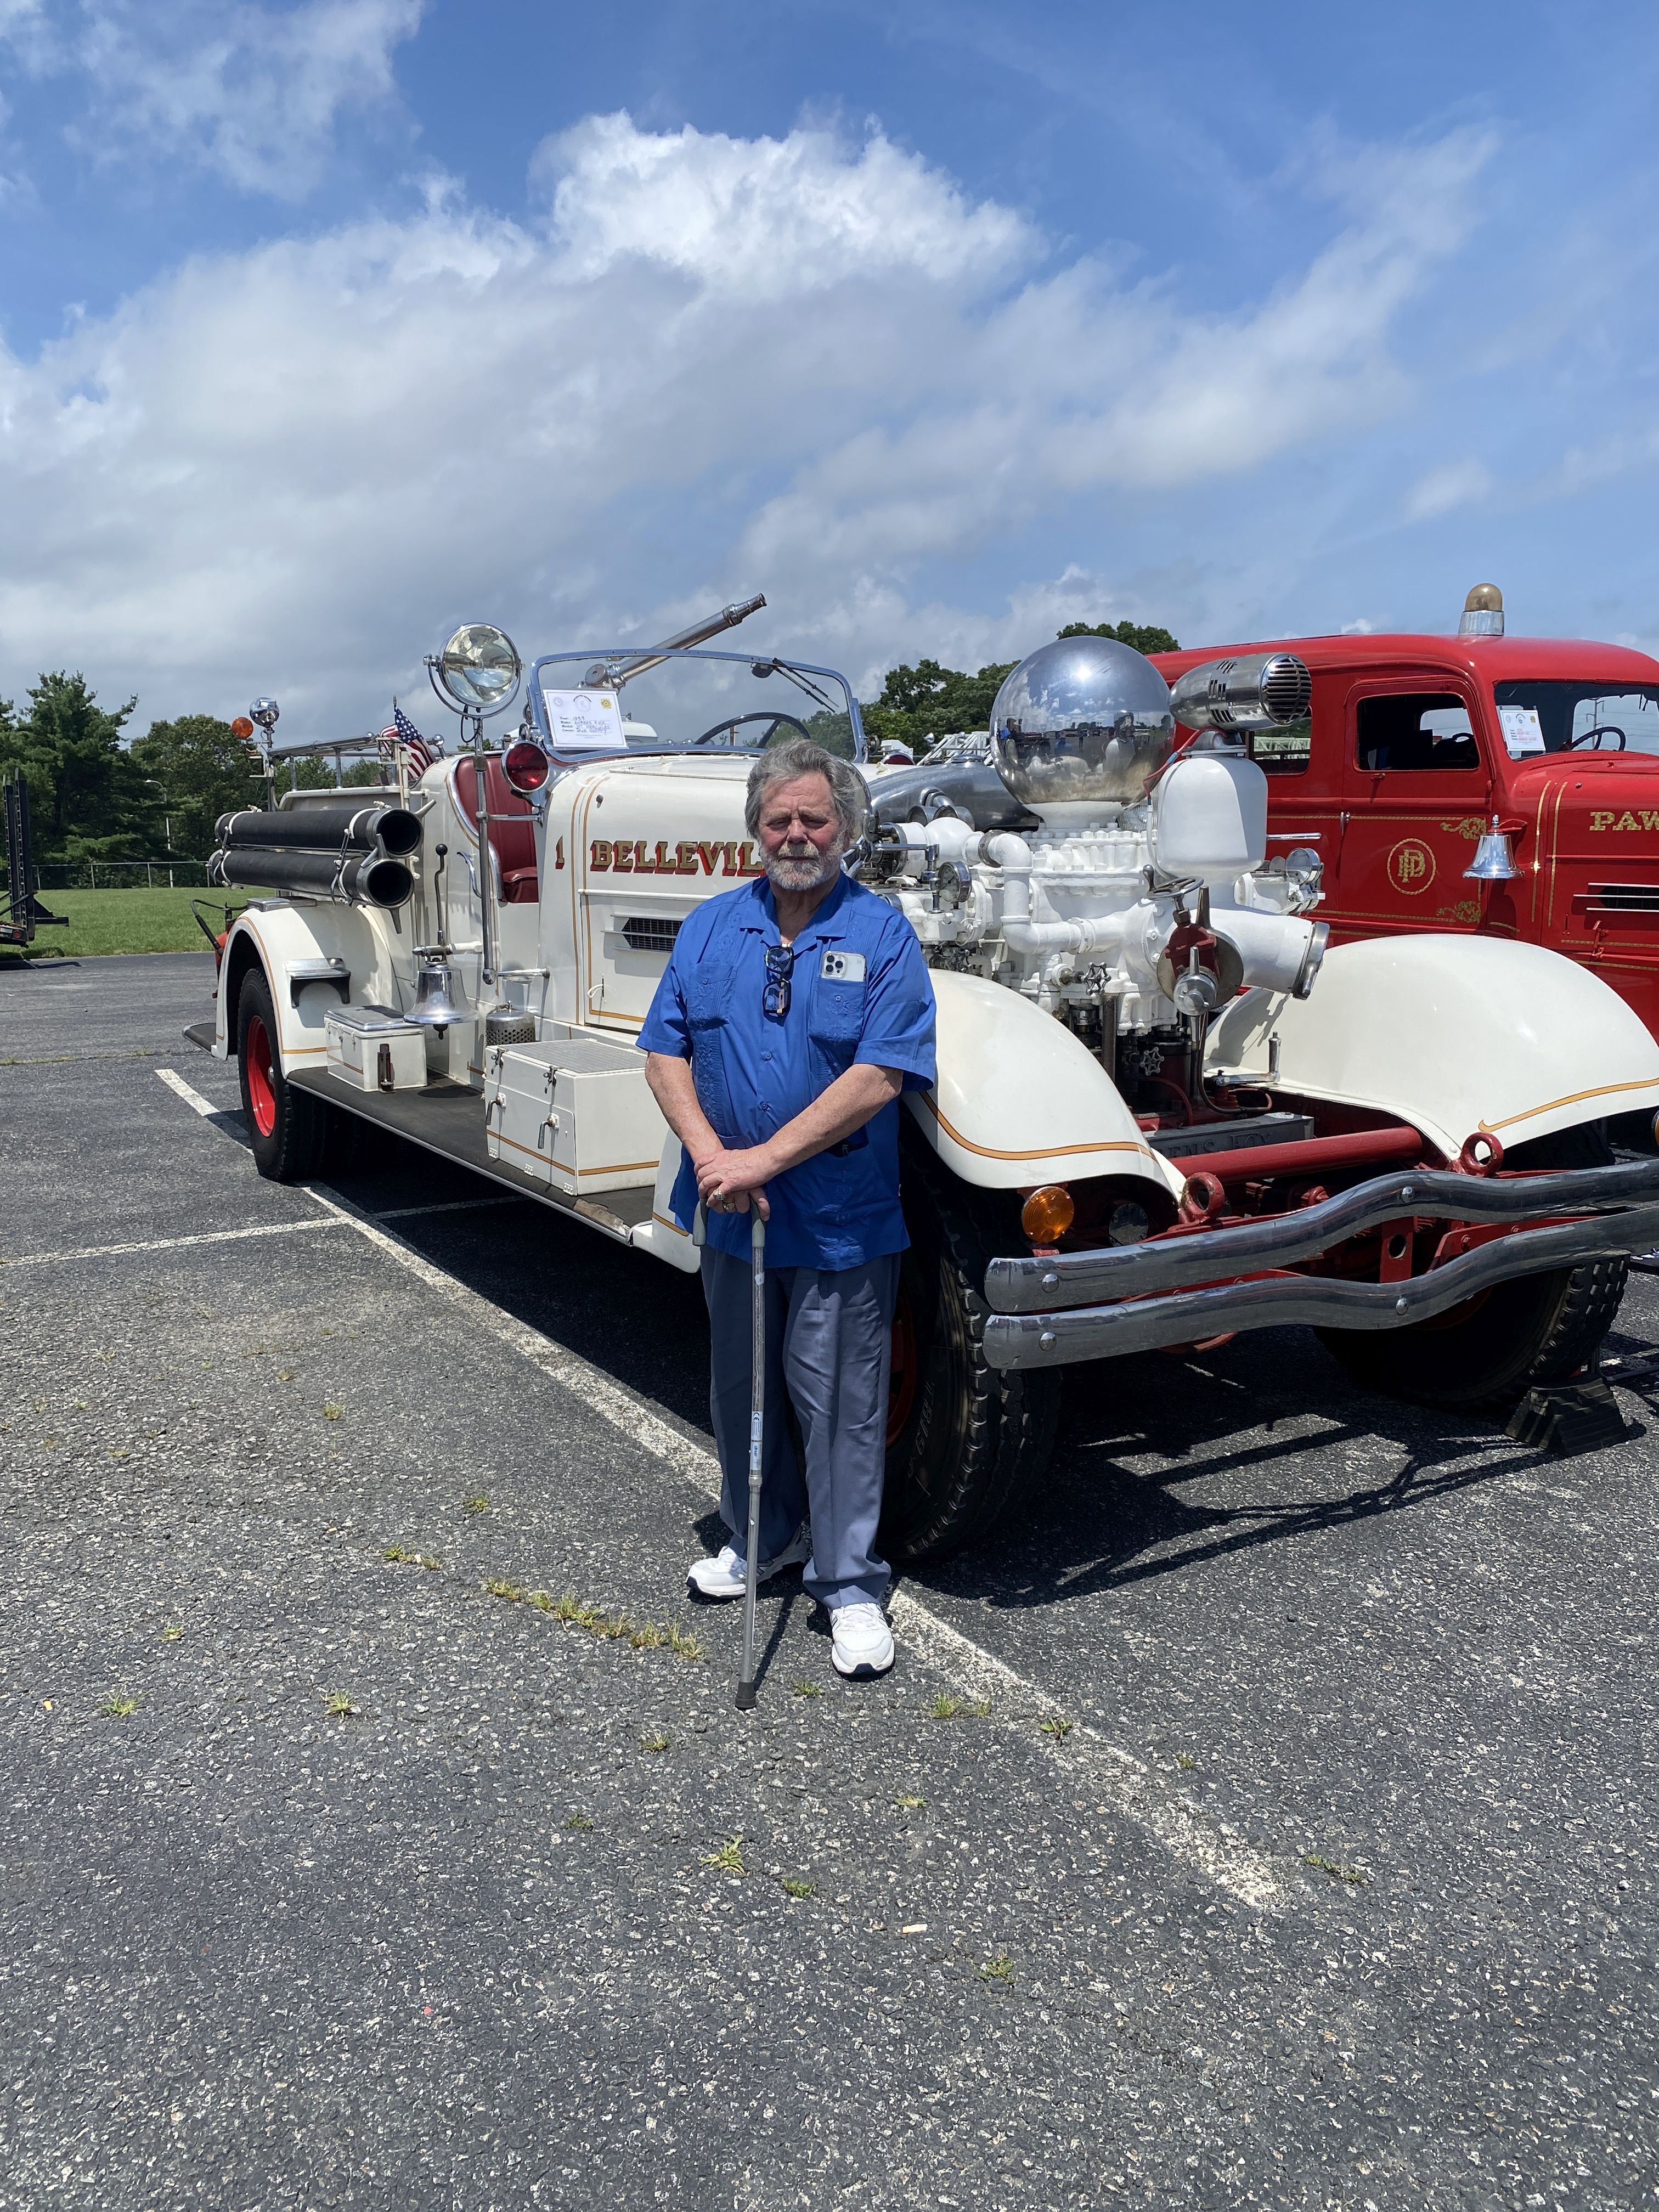 Dick Shappy with his 1939 Ahrens Fox HT Hercules from Belleville, New Jersey